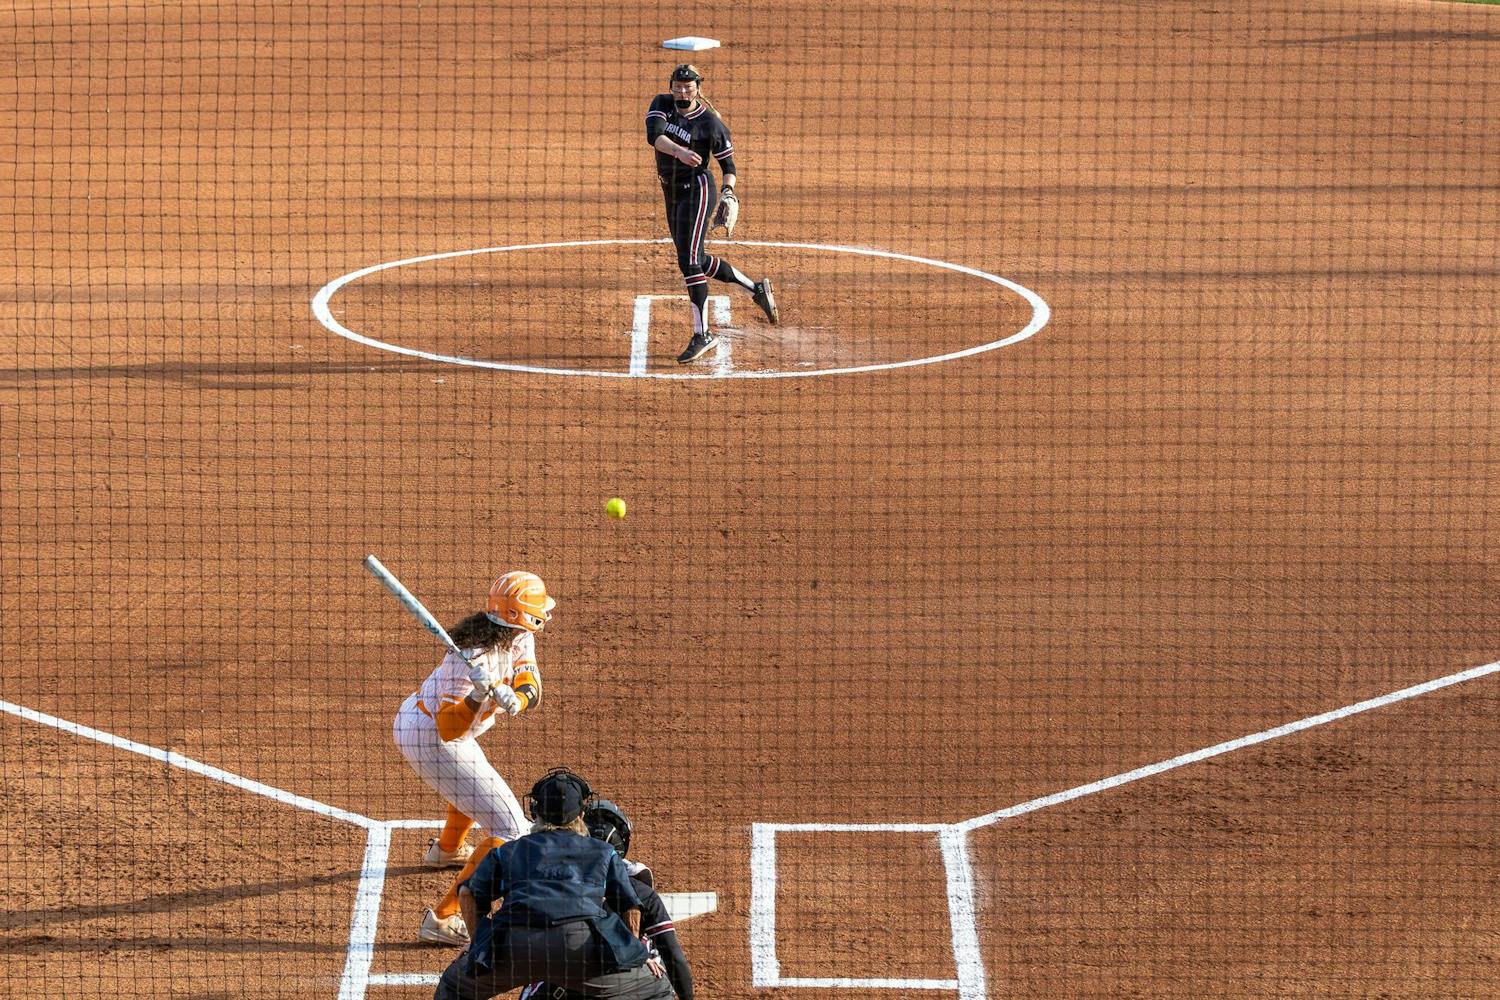 Fifth-year pitcher Alana Vawter throws a pitch in the first inning of the second game of the series against the University of Tennessee on March 24, 2024. During the three innings pitched, Vawter allowed five hits, four errors and struck out two batters.